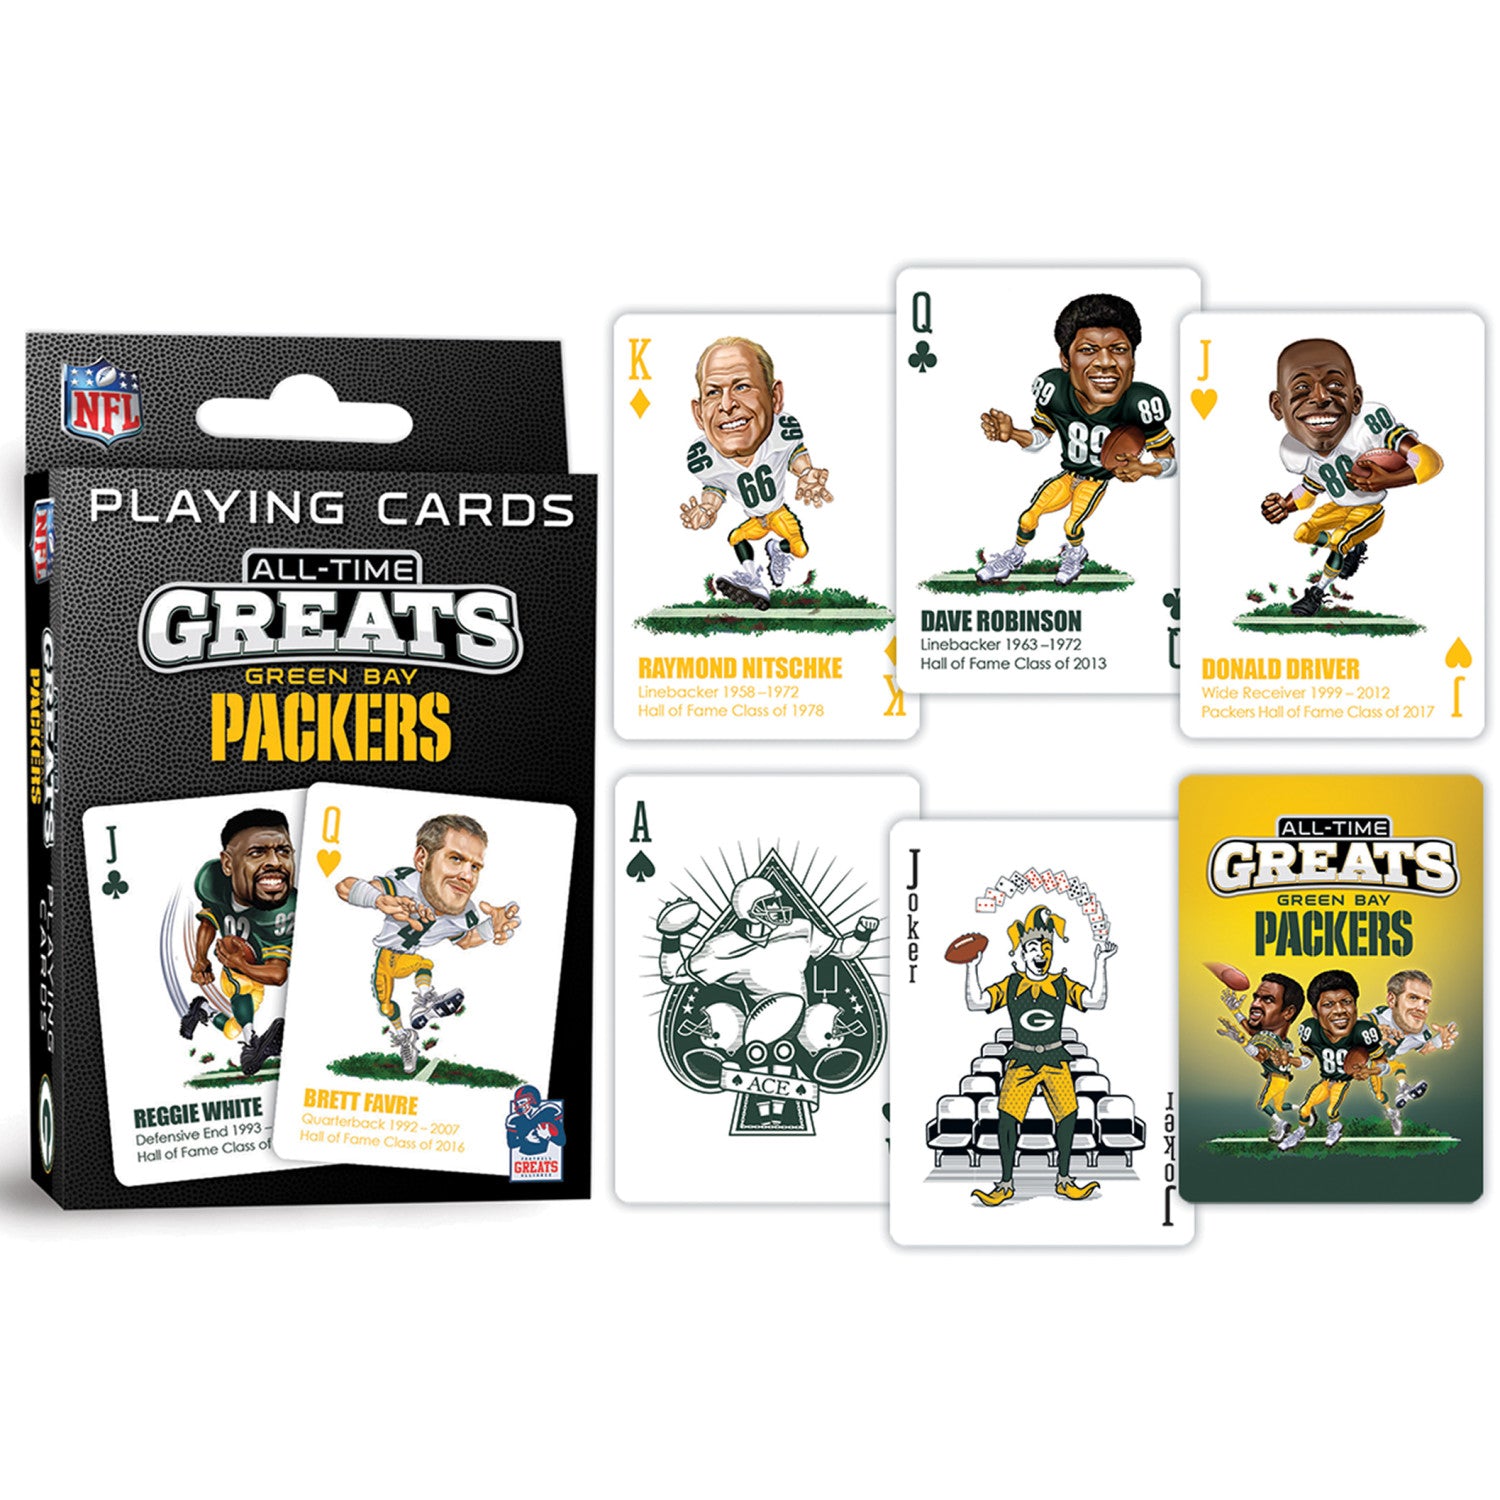 Green Bay Packers All-Time Greats Playing Cards - 54 Card Deck